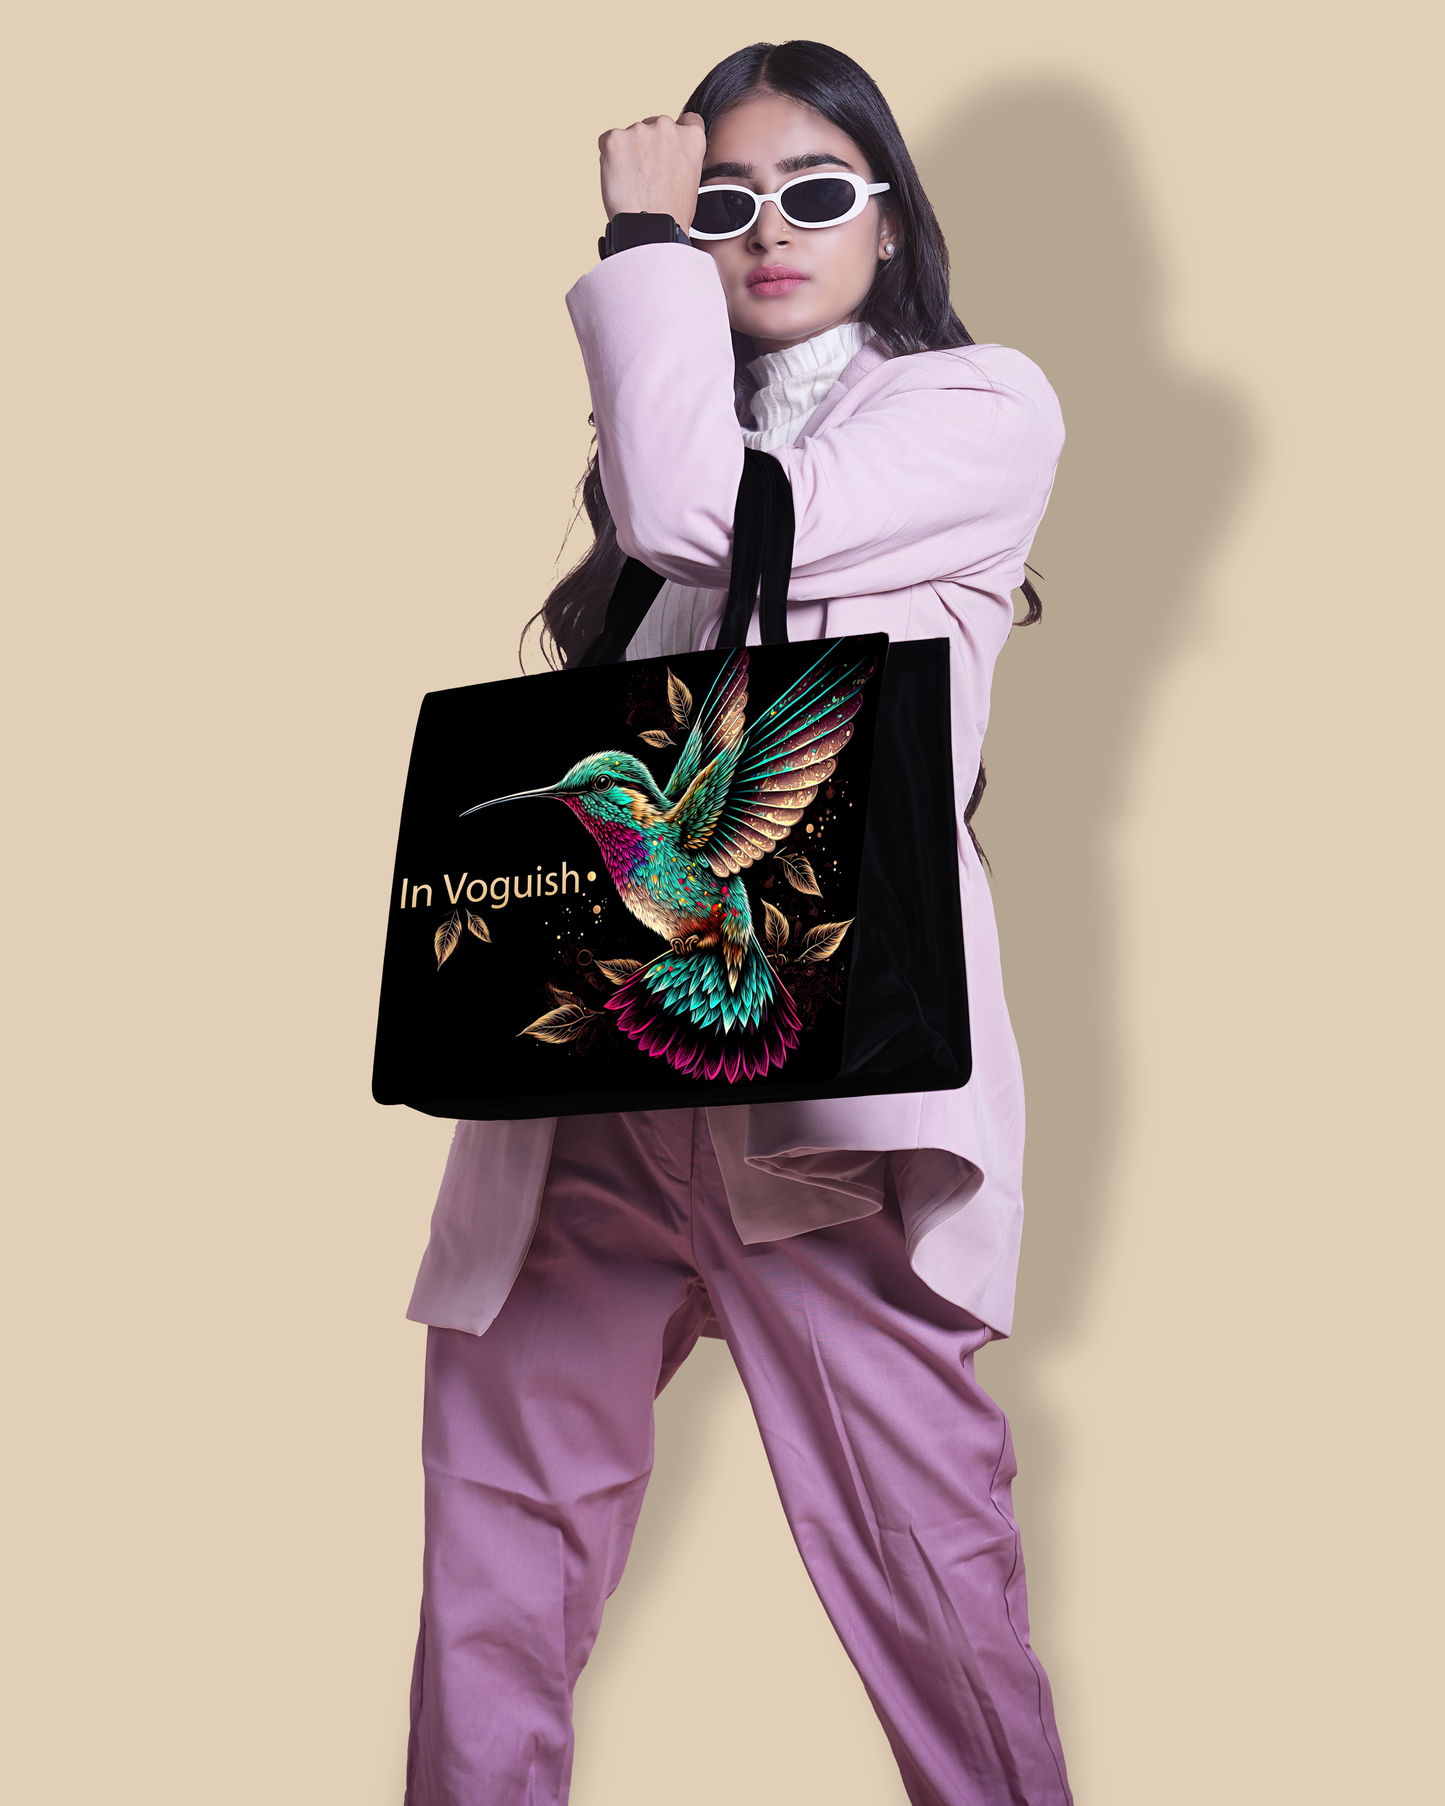 Customized Tote Bag  Designed with Beautiful Flying Sparrow